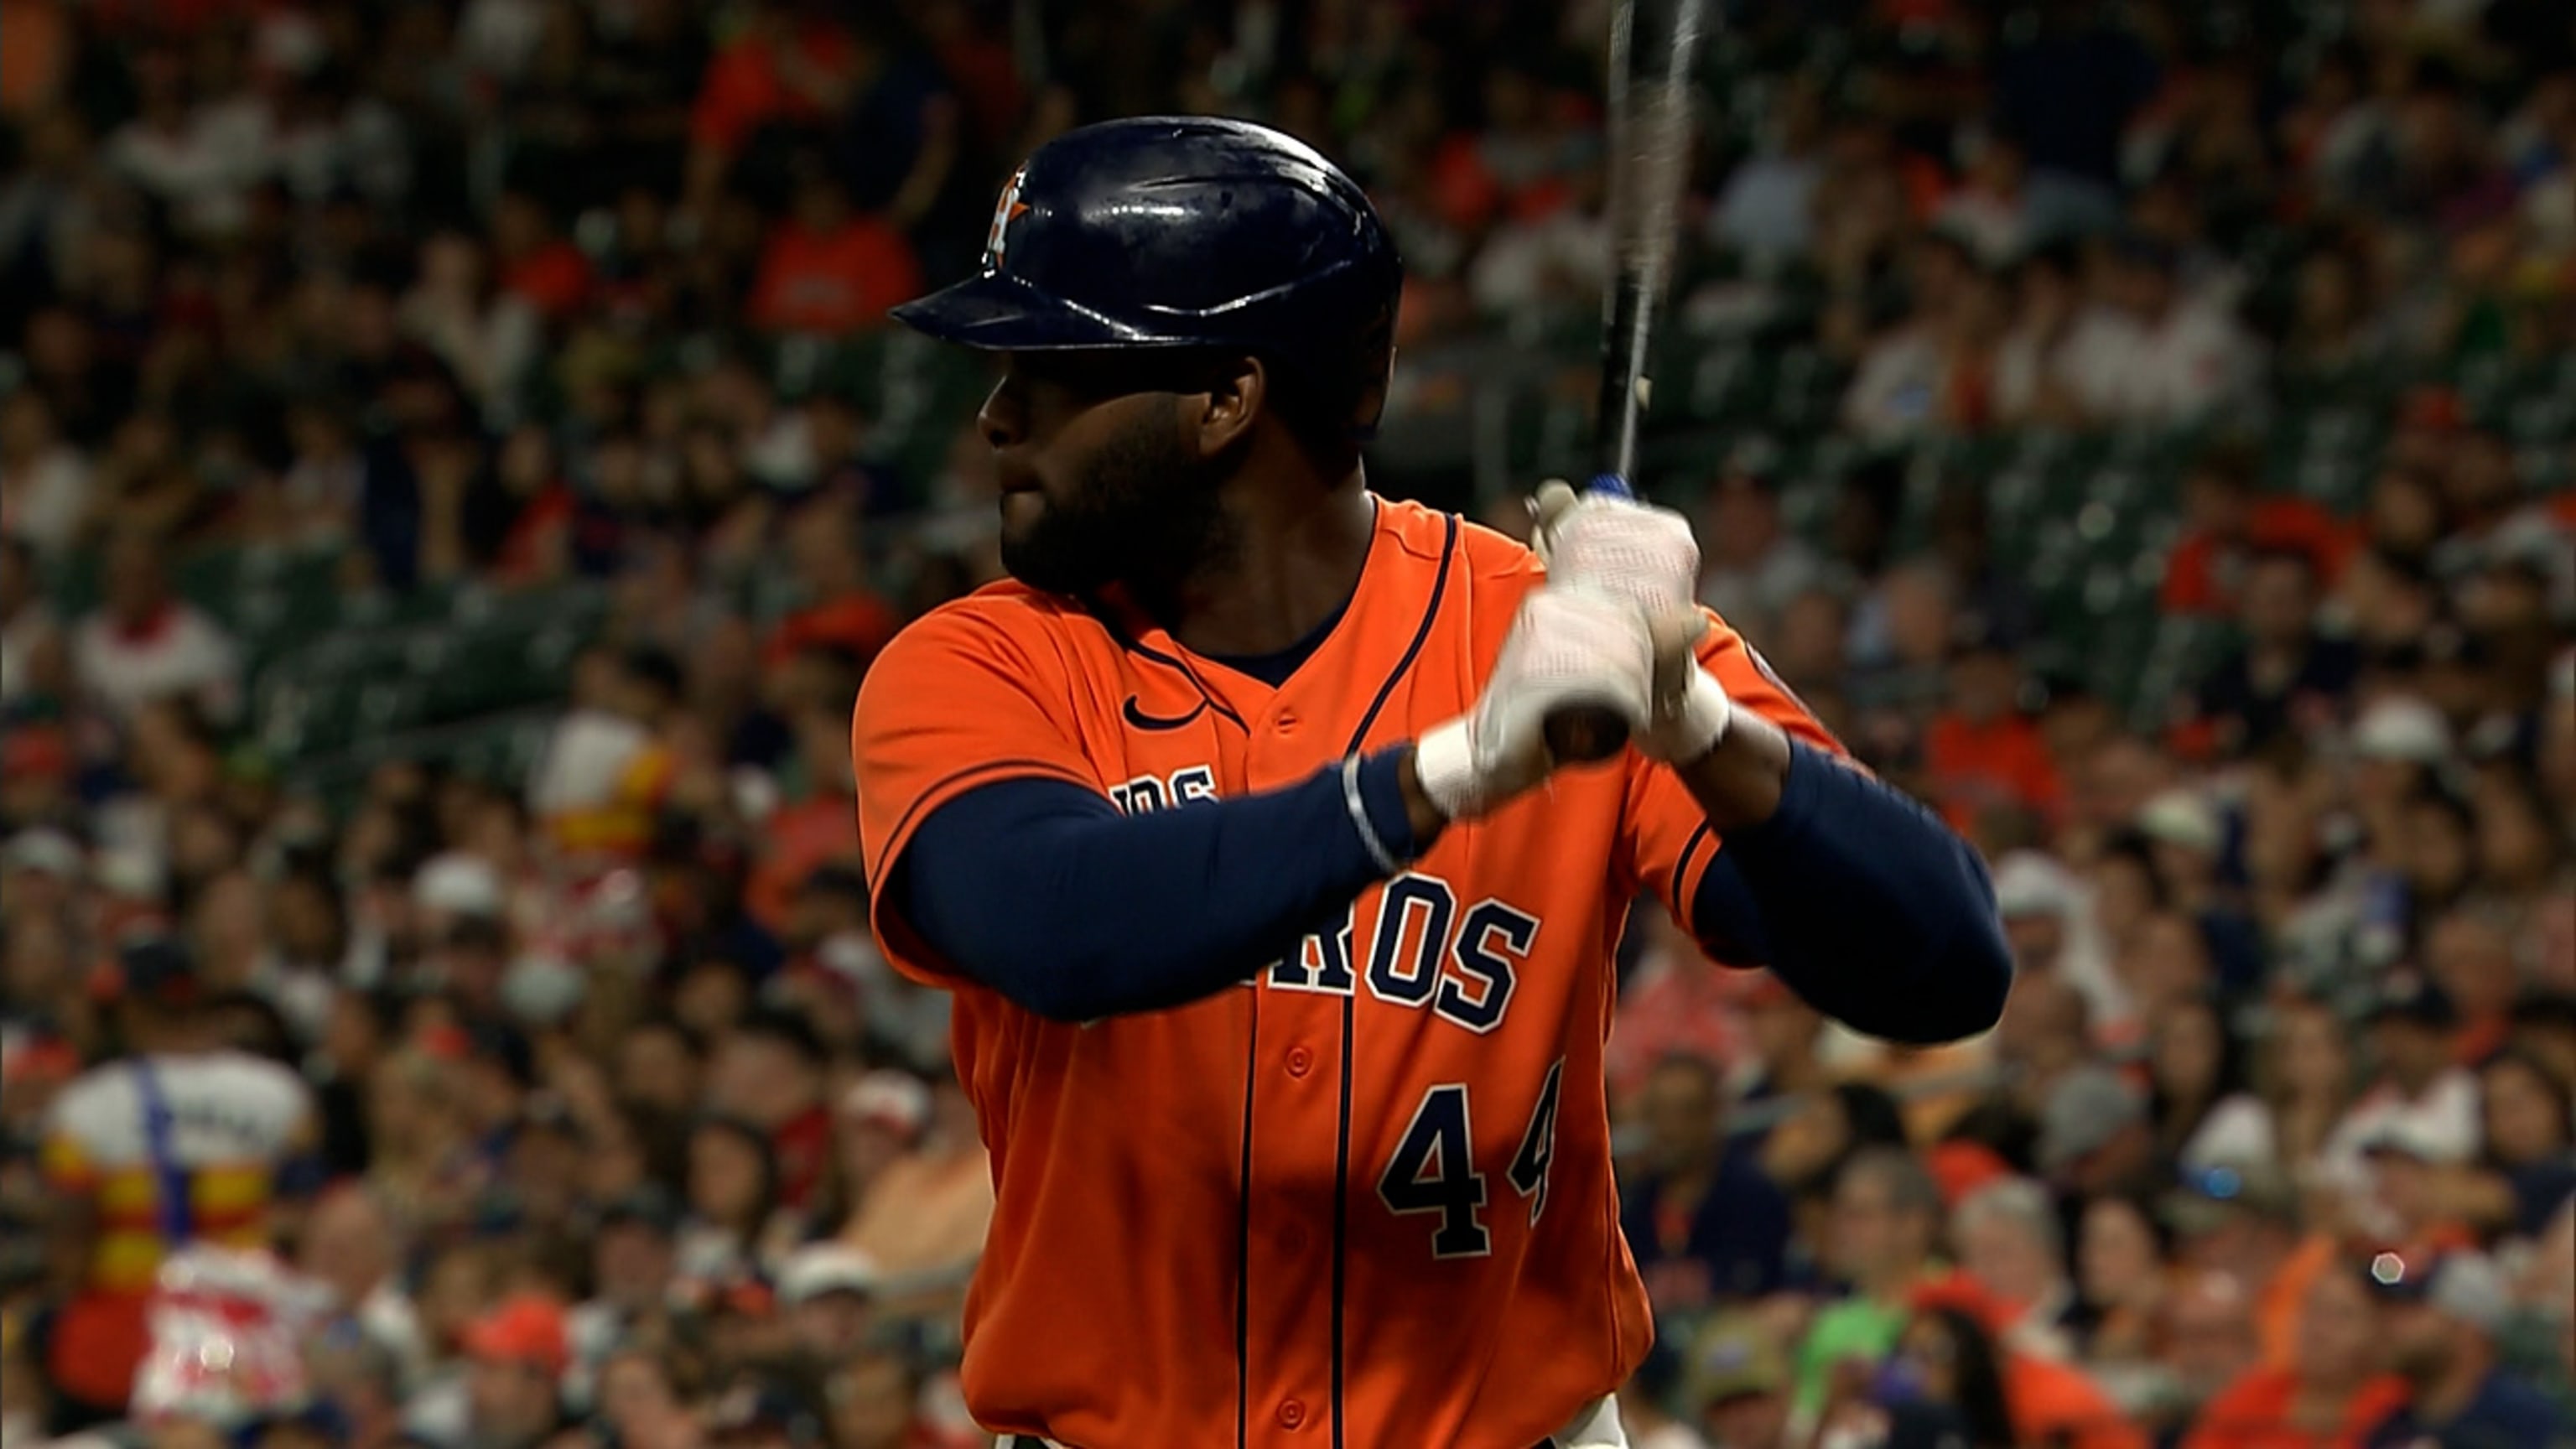 Shoutout to Astros pitchers AND Yordan Alvarez on a great start to 2022